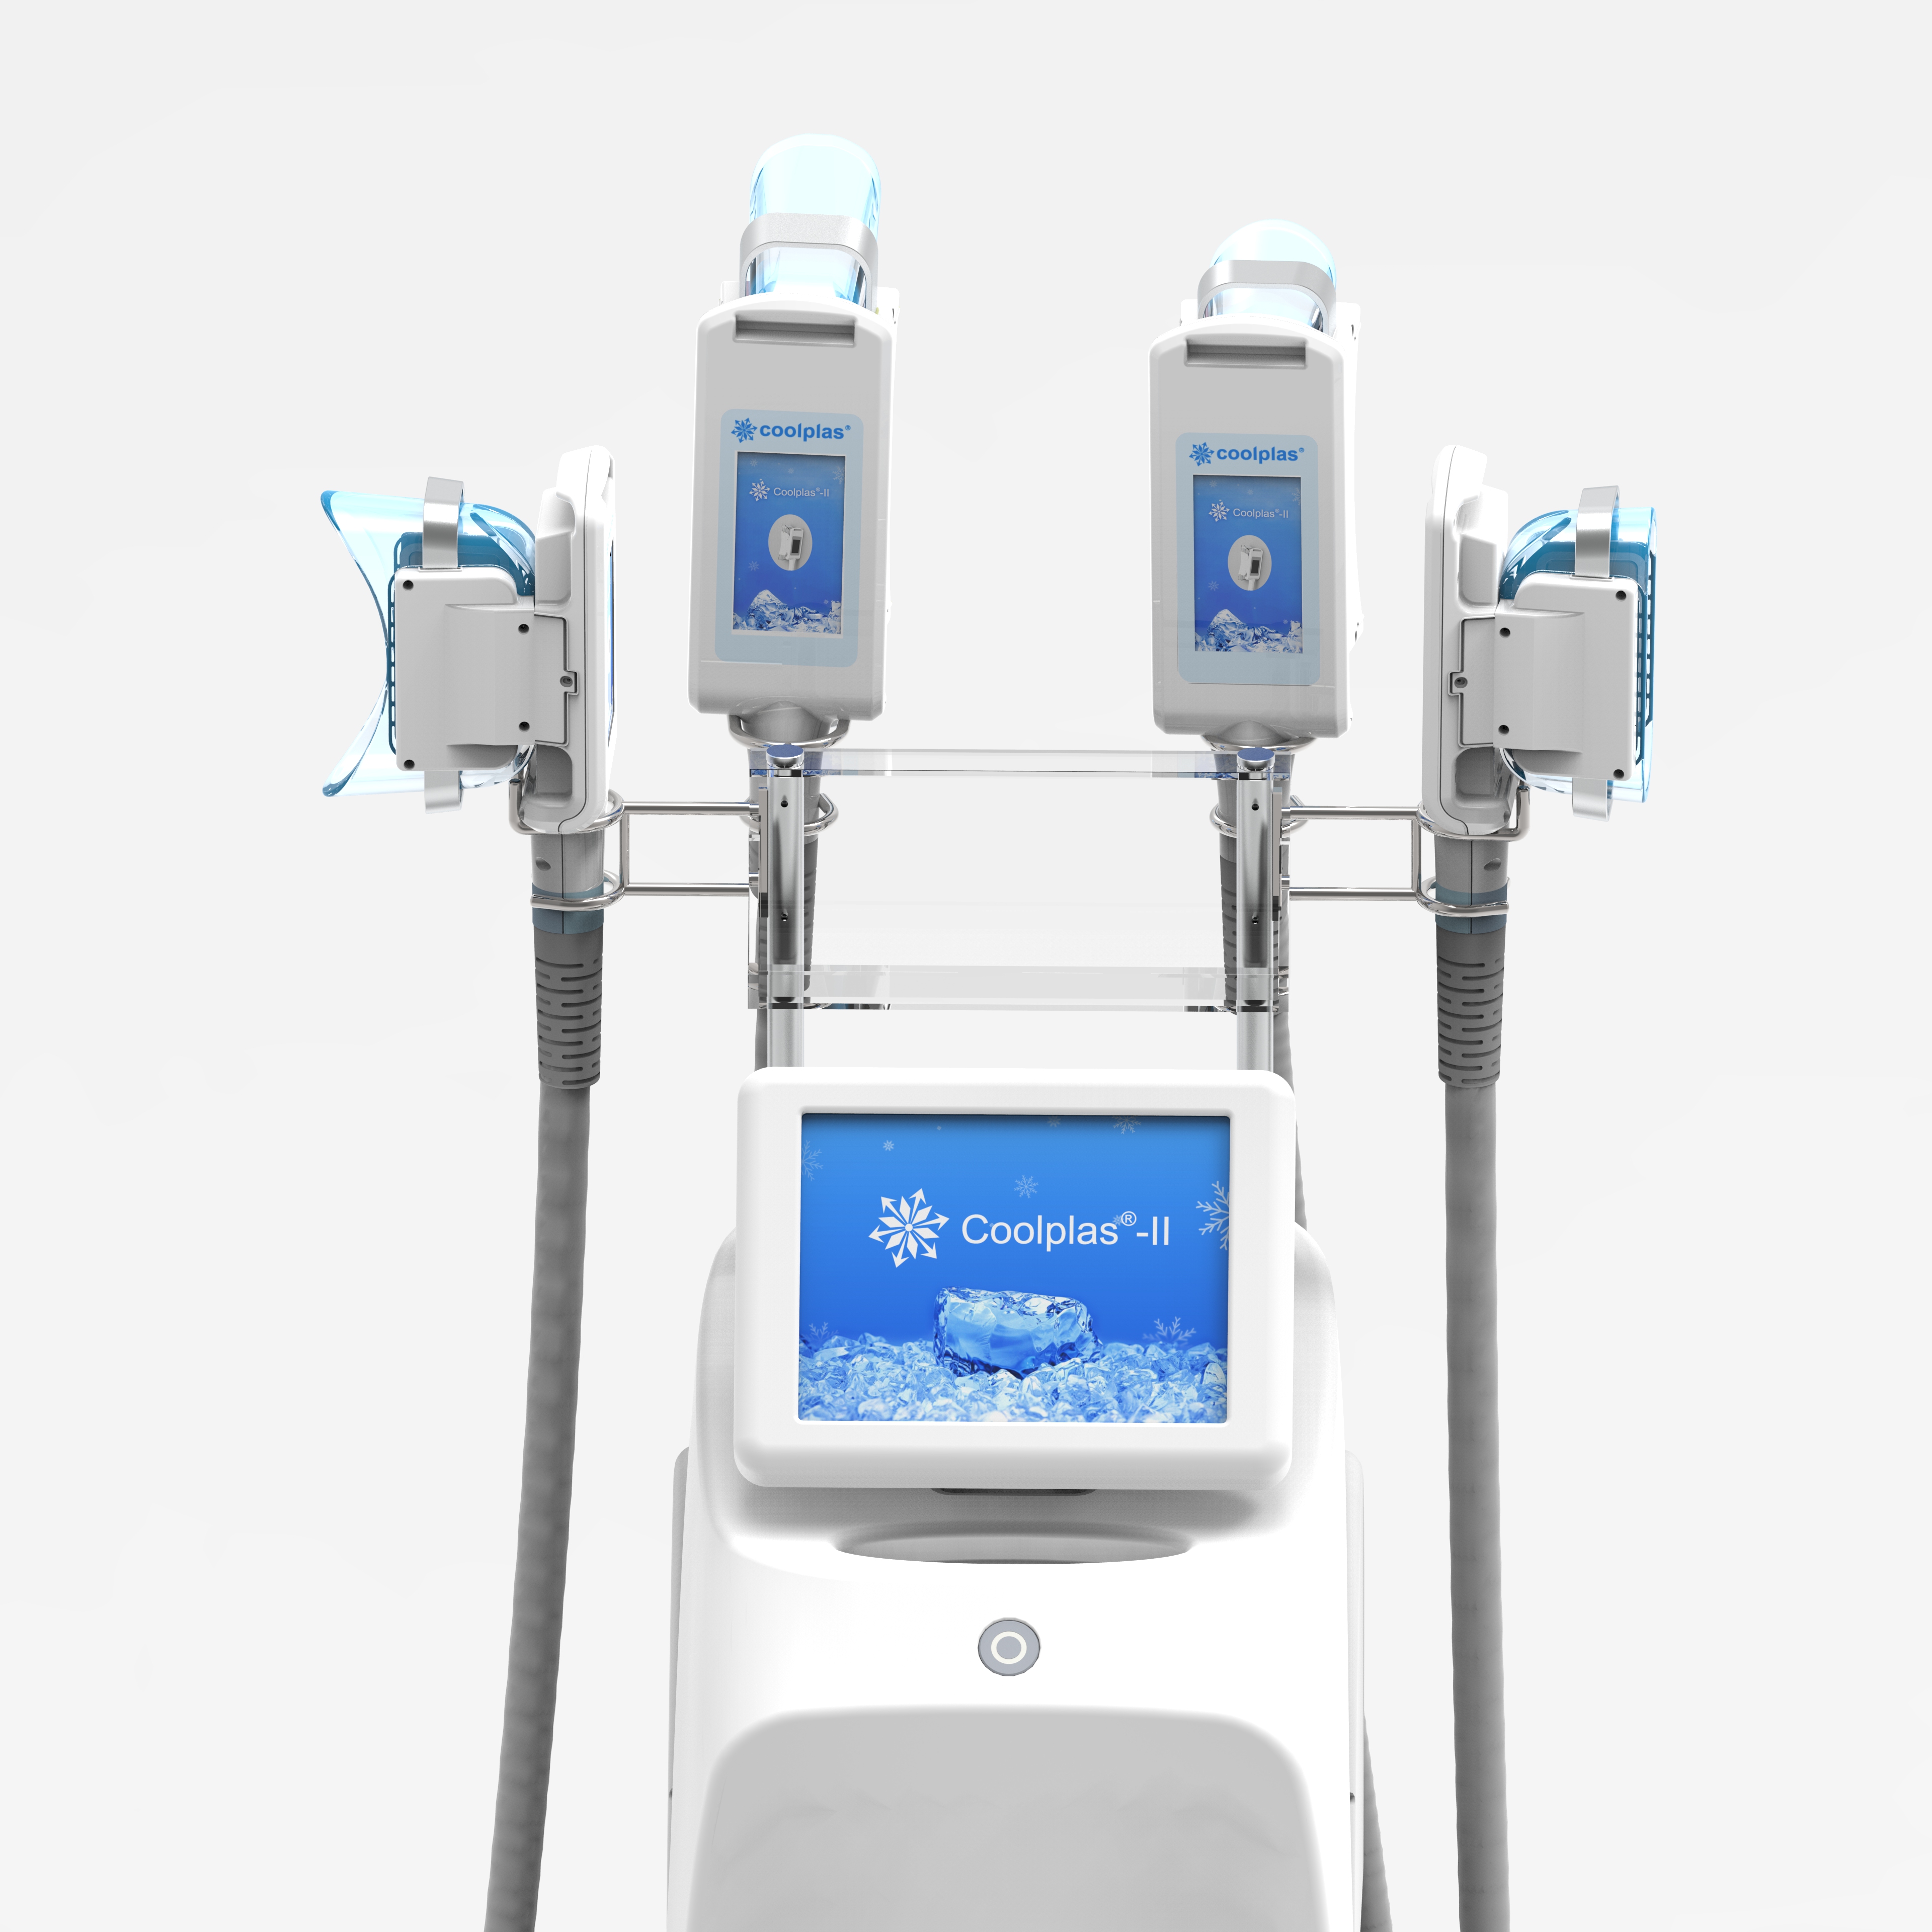 What are the disadvantages of cryolipolysis?